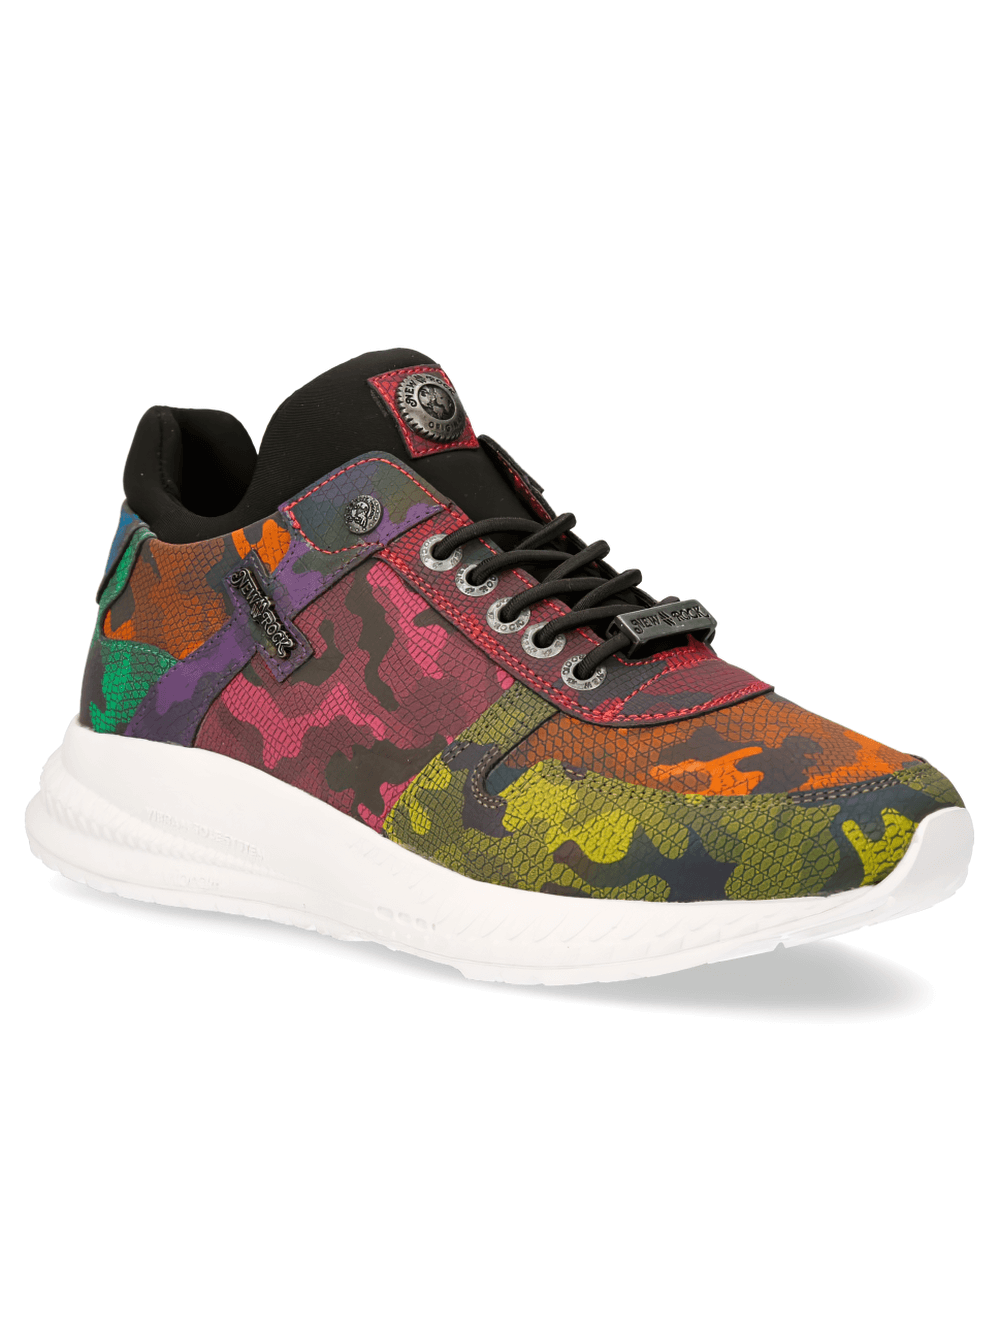 NEW ROCK Multicolor Camo Lace-Up Sports Sneakers